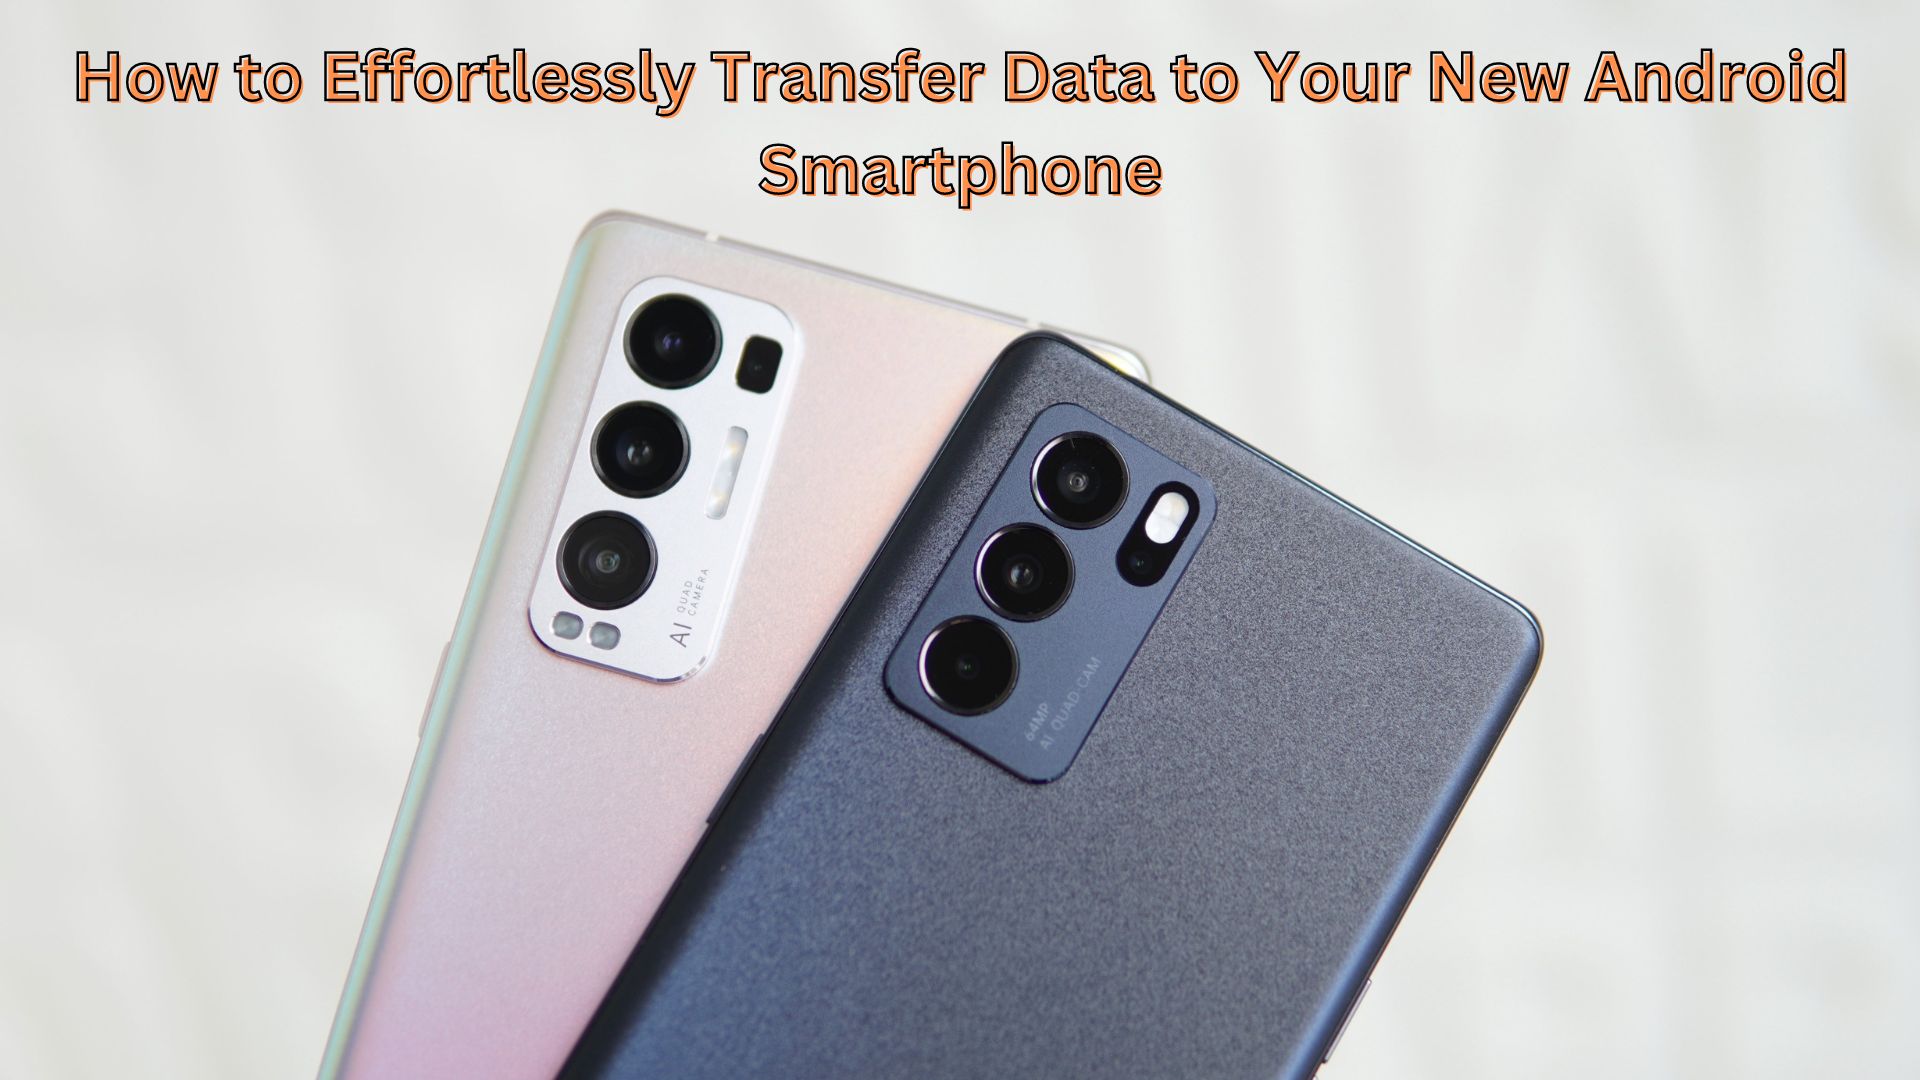 How to Effortlessly Transfer Data to Your New Android Smartphone